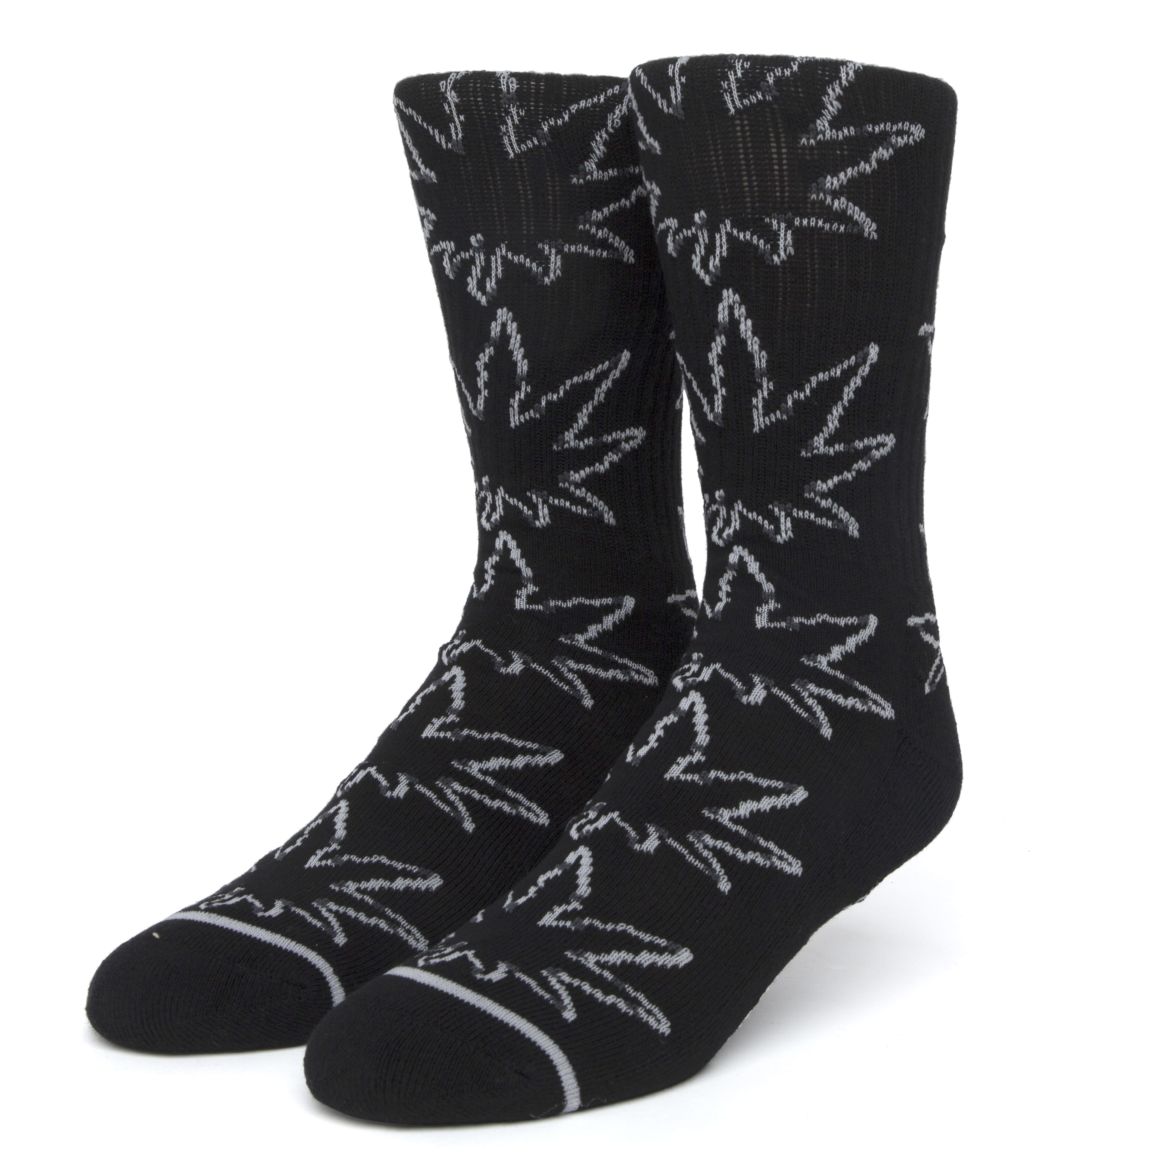 CHAUSSETTES HUF TOUJOURS OUVERTES PLANTLIFE